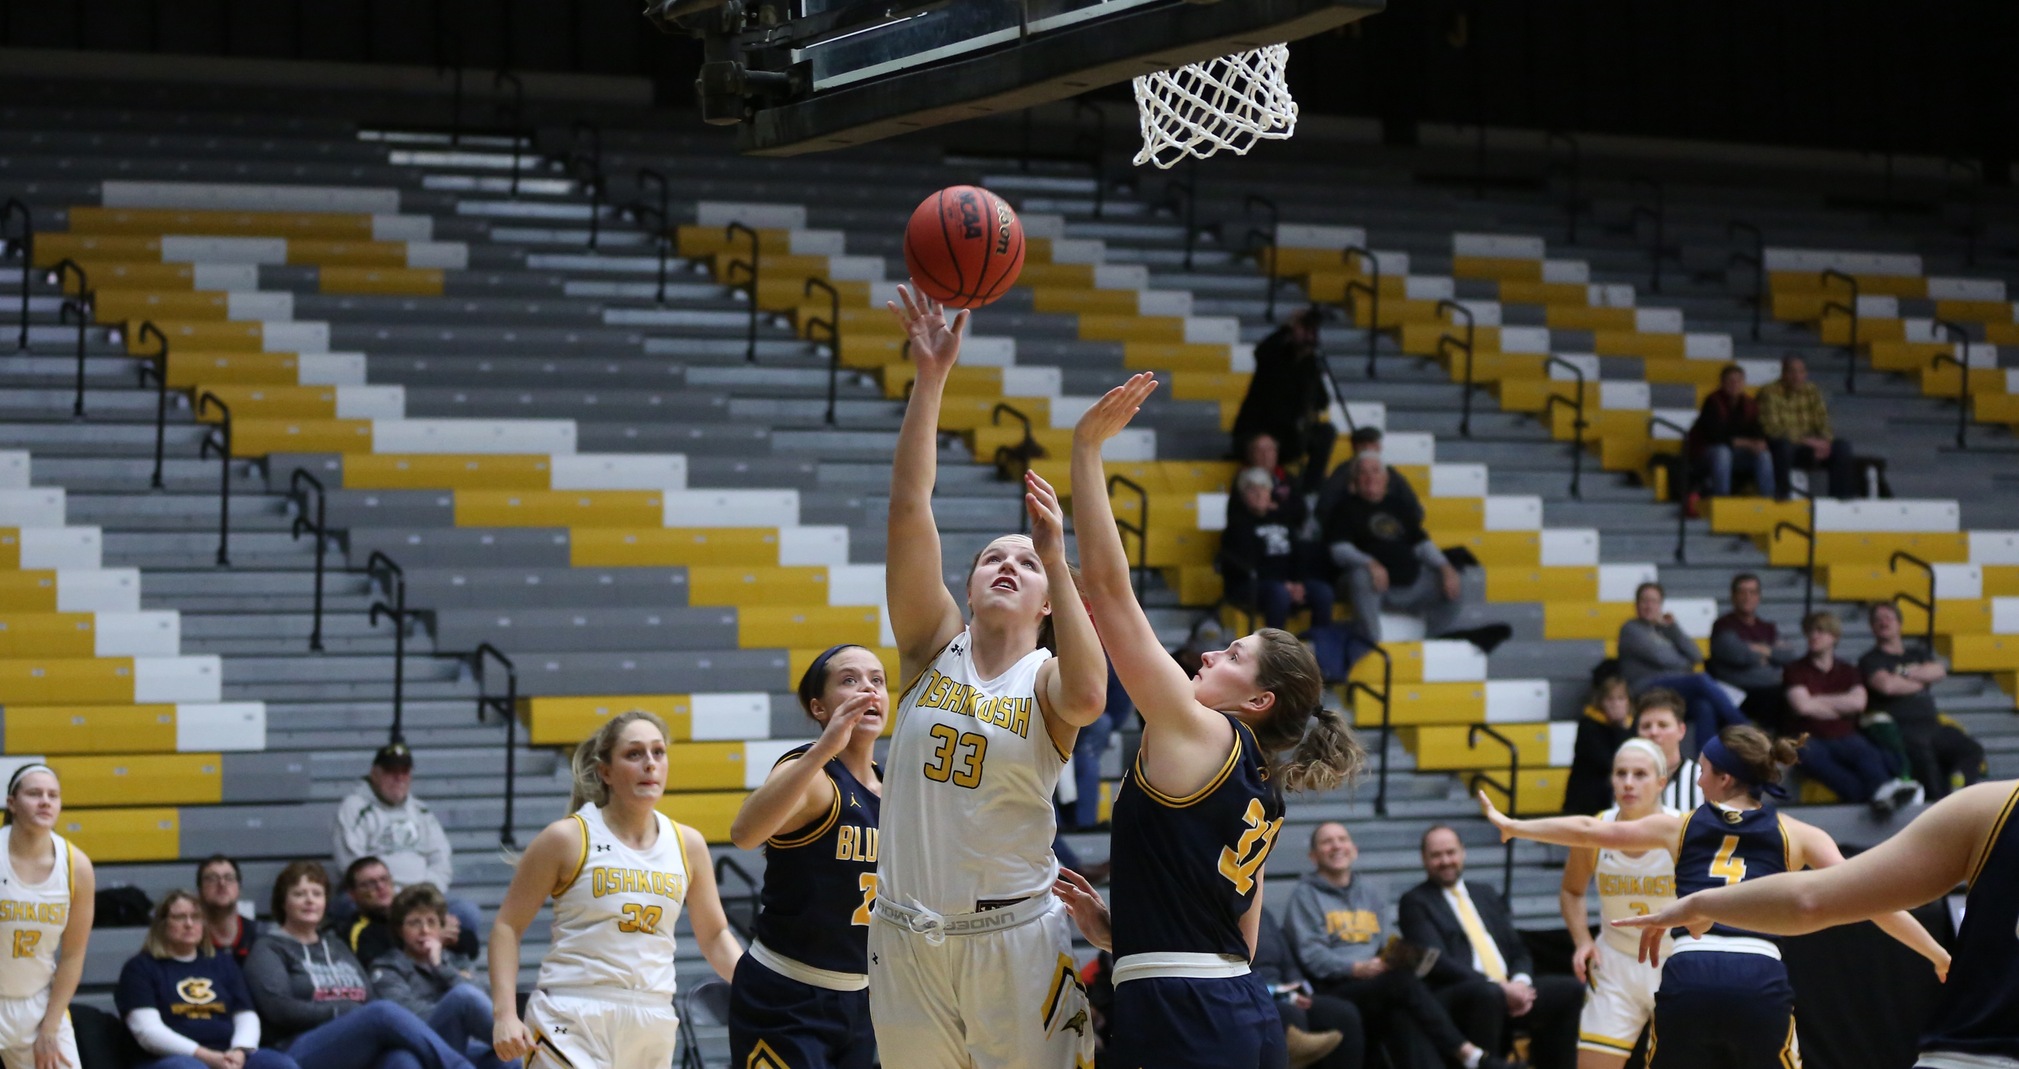 Nikki Arneson scored 13 points with five rebounds, three assists and three steals against the Blugolds.